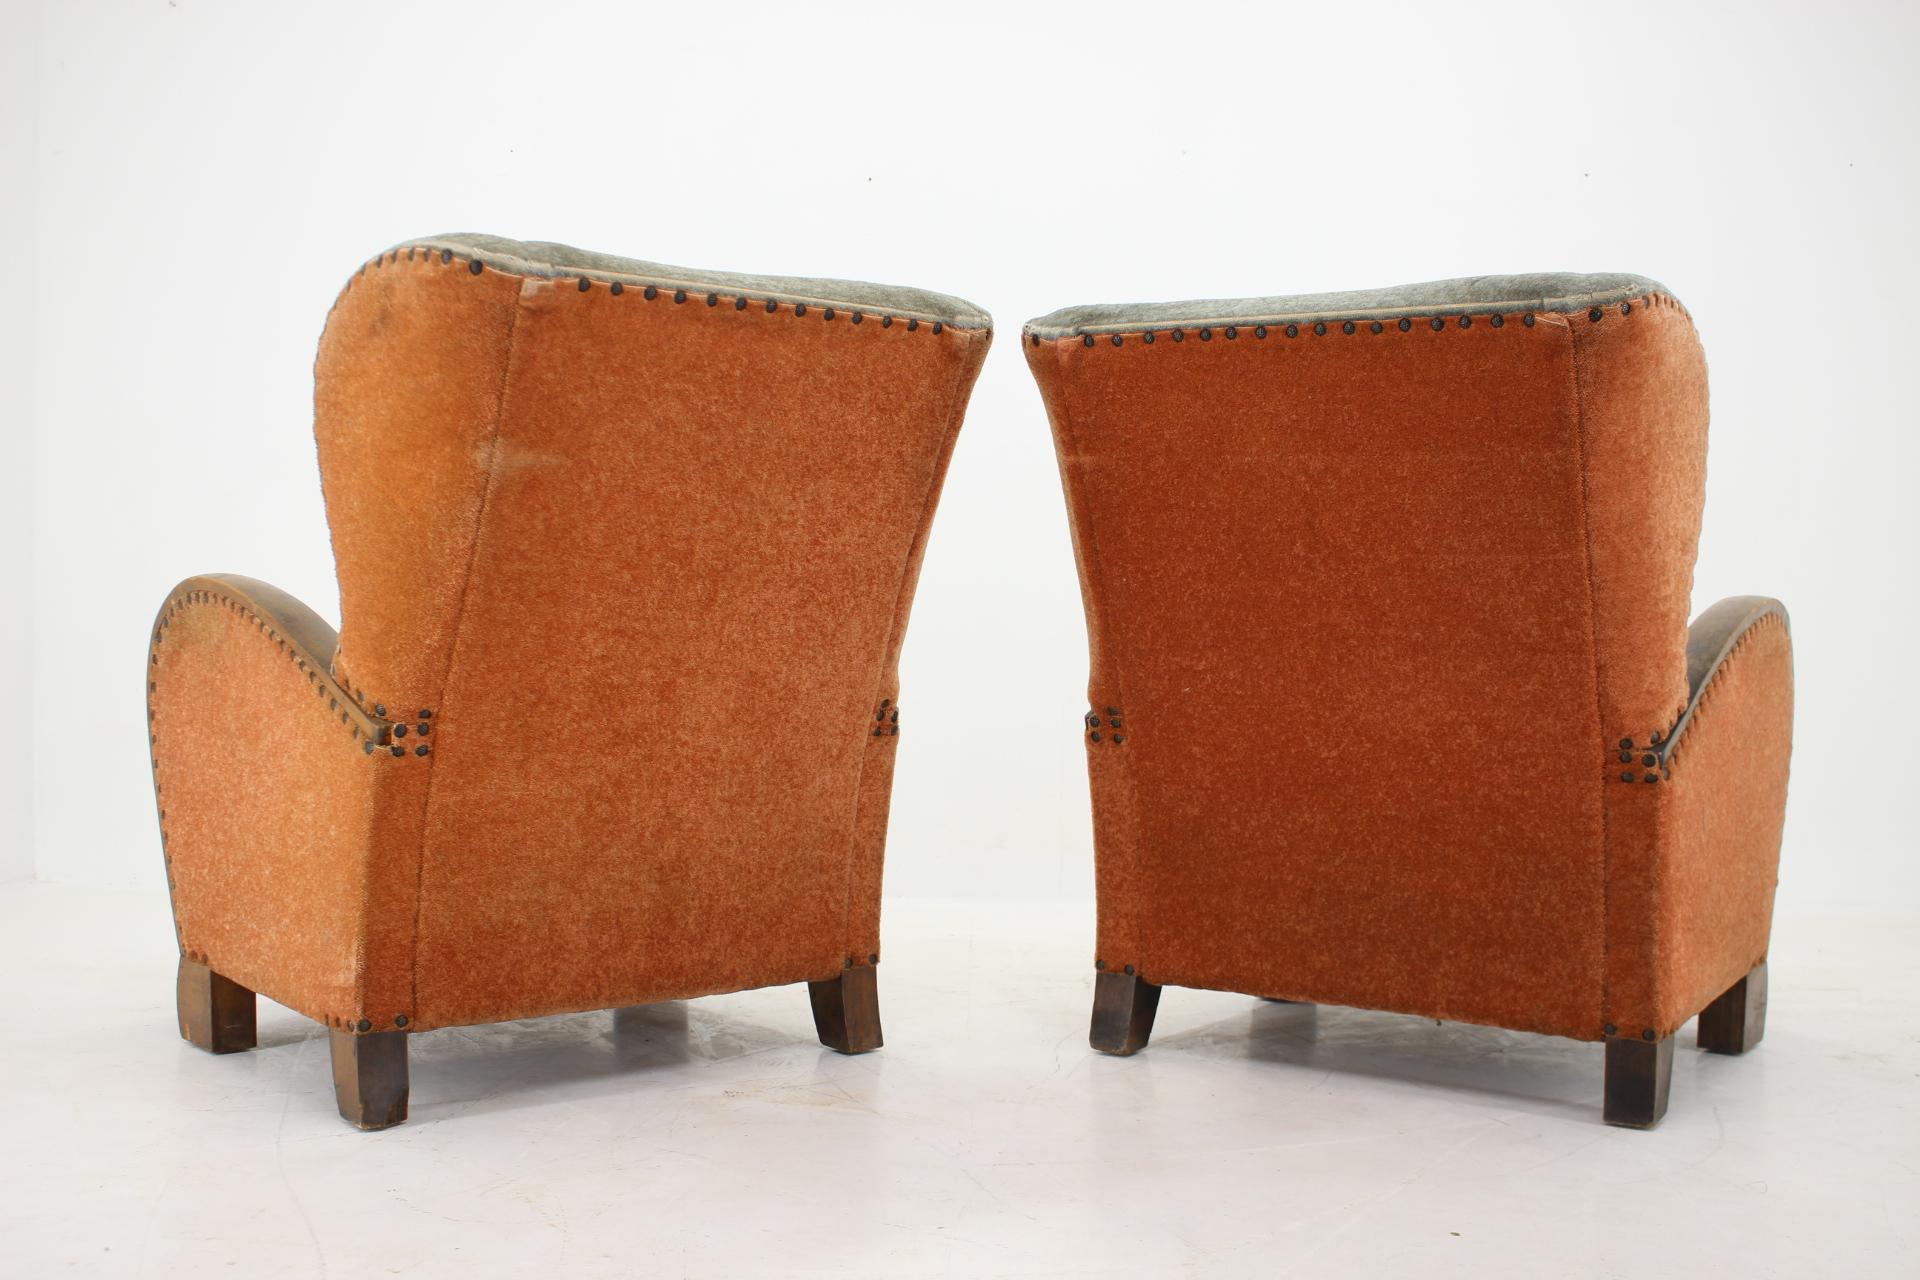 Upholstery 1940s Pair of Large Wing Chairs, Czechoslovakia